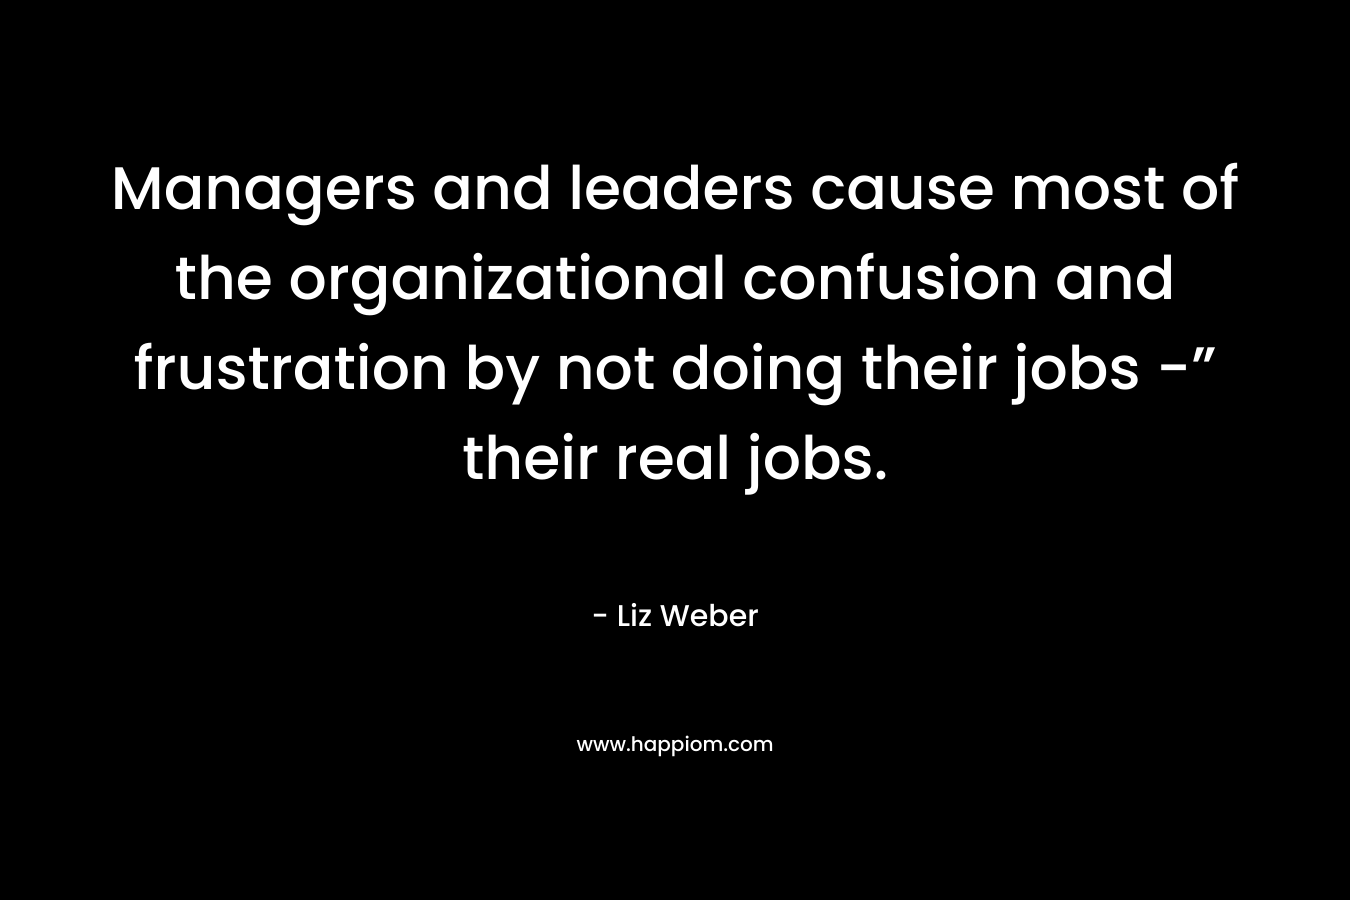 Managers and leaders cause most of the organizational confusion and frustration by not doing their jobs -” their real jobs. – Liz Weber